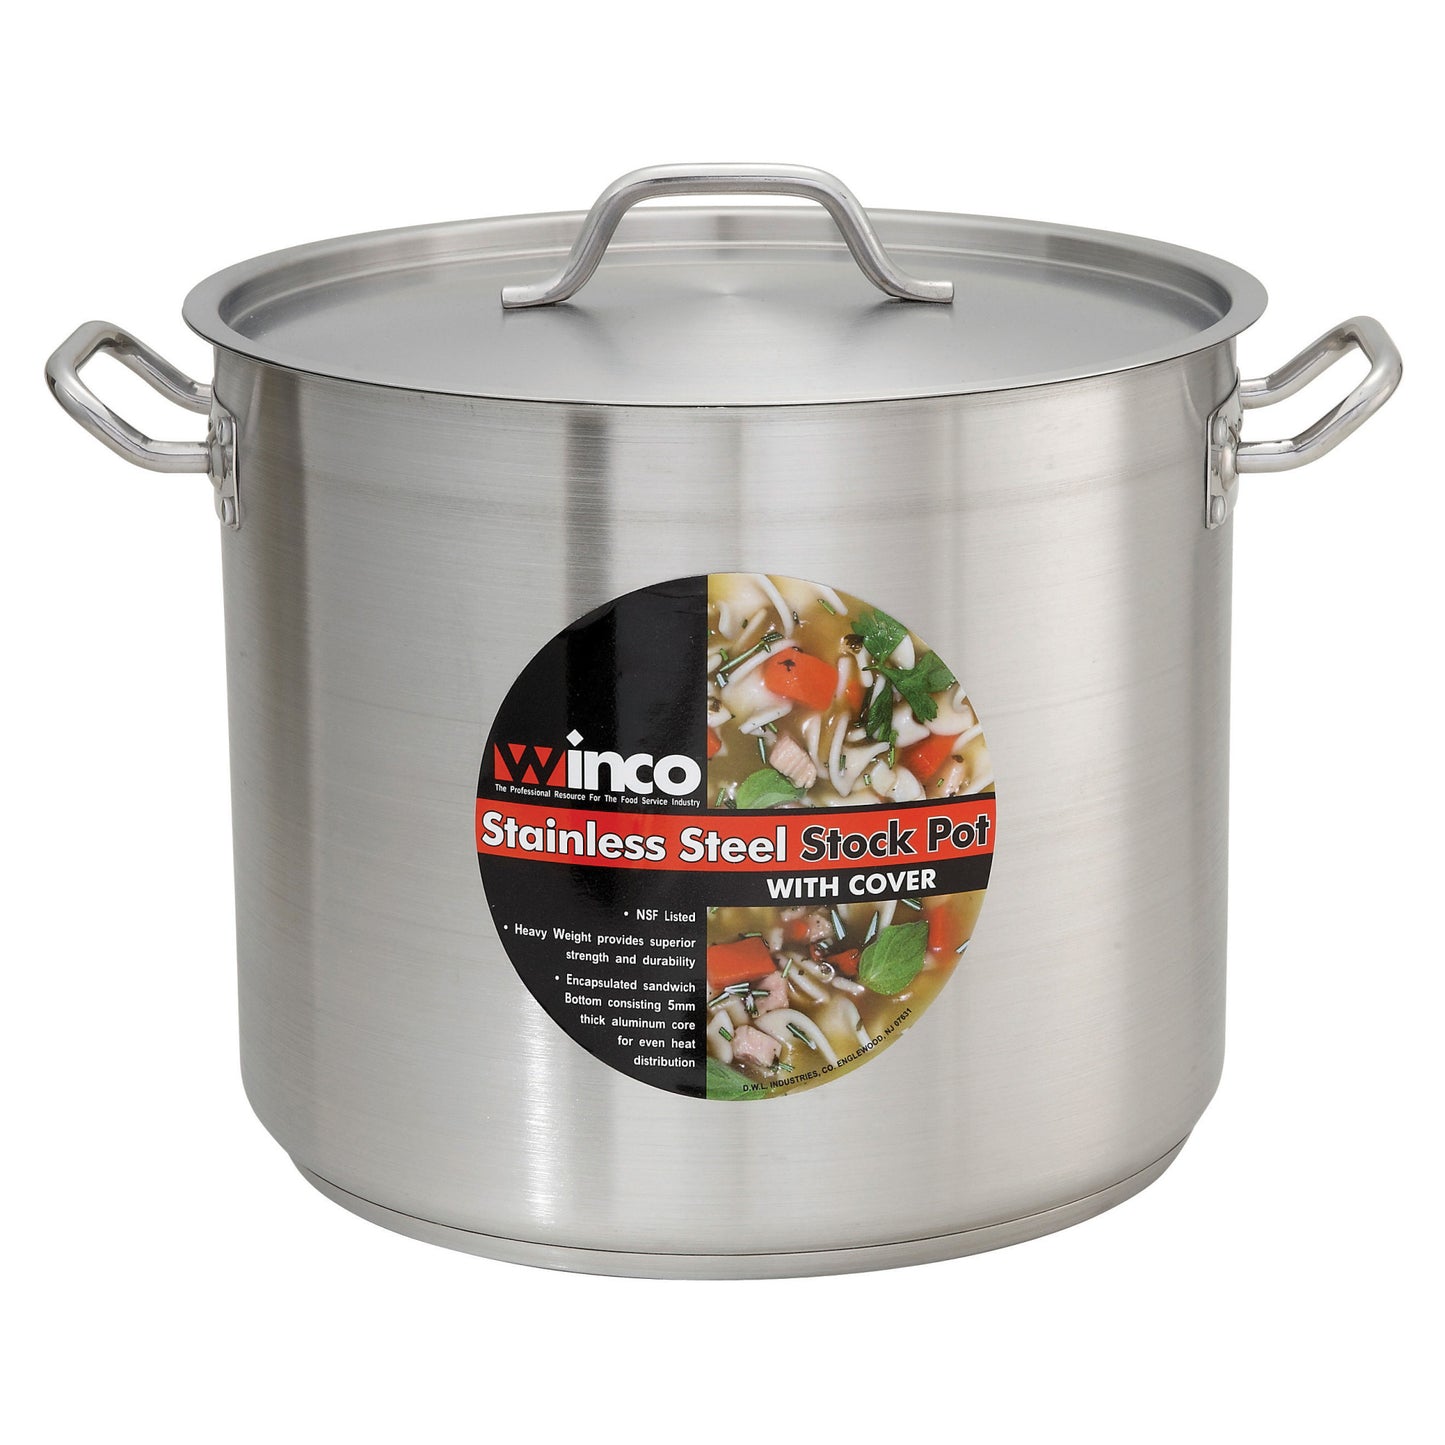 Stainless Steel Stock Pot with Cover - 12 Quart